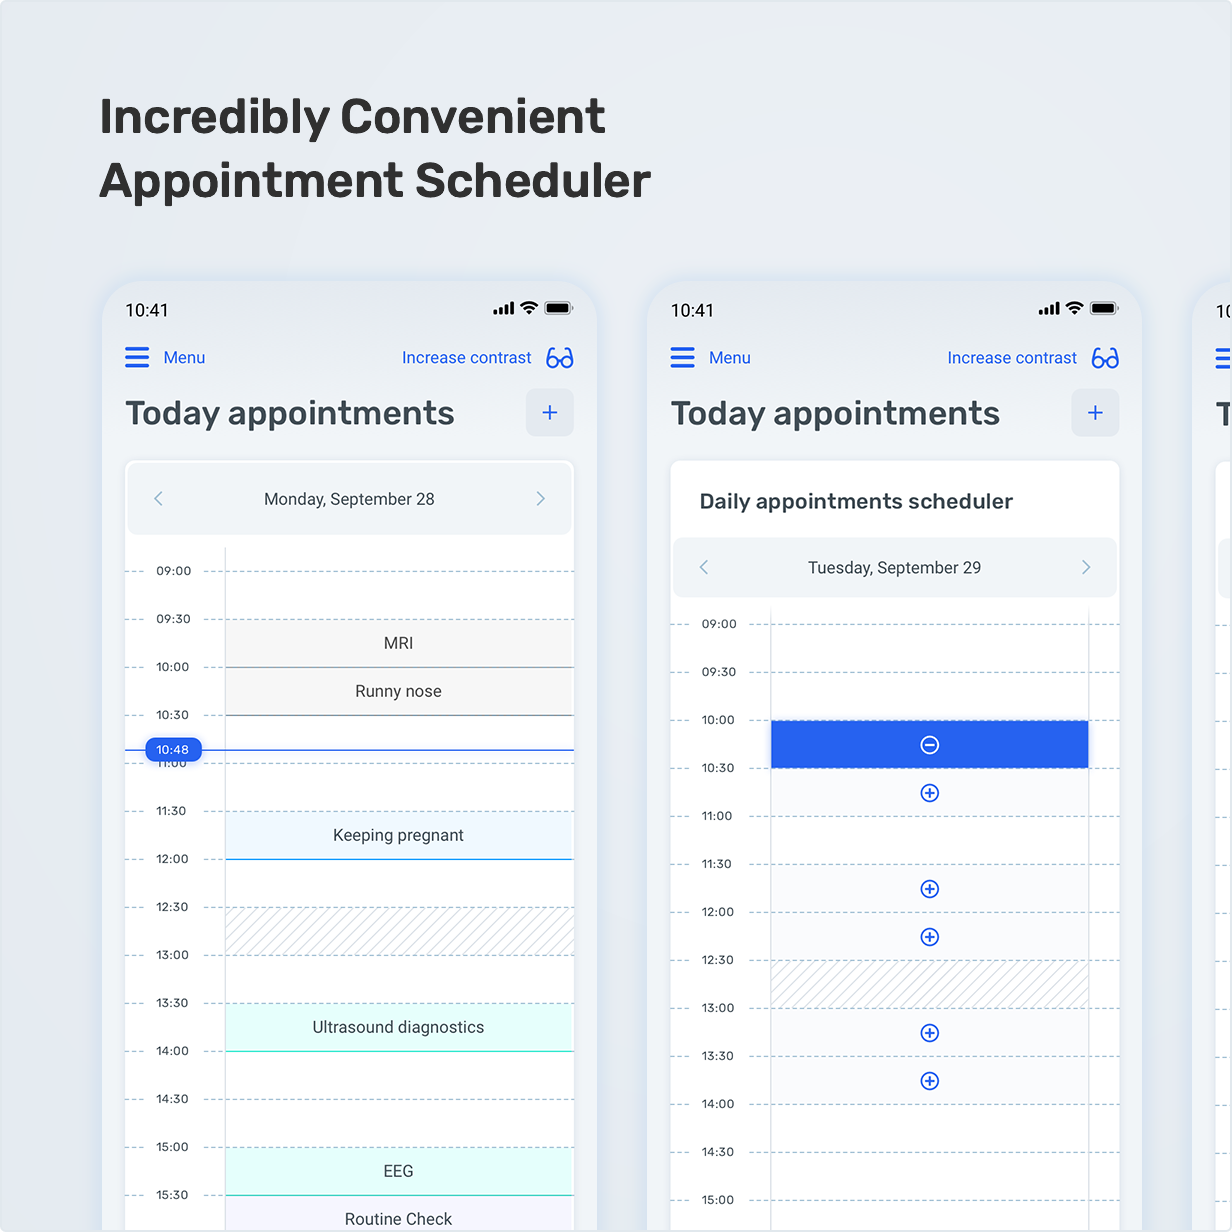 Incredibly Convenient Appointment Scheduler